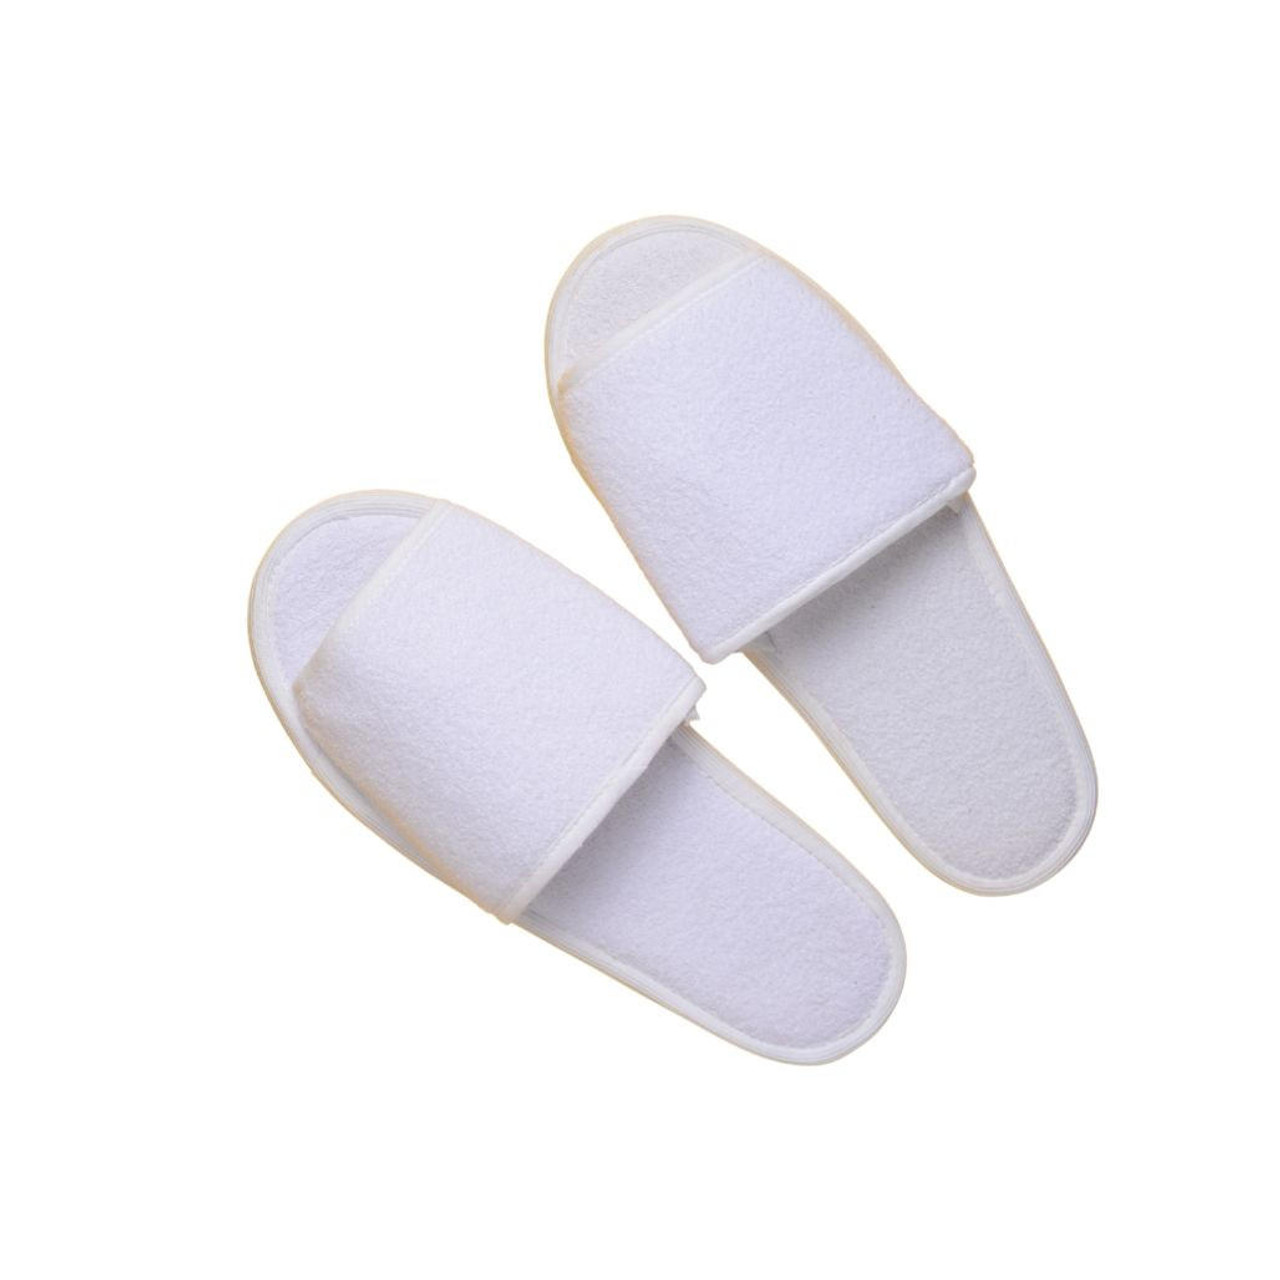 Le Montreux Closed Toe Slippers, Waffle Weave, White, OSFM | Waffle Slippers  | Slippers | Bed and Bath Linens | Open Catalog | American Hotel Site